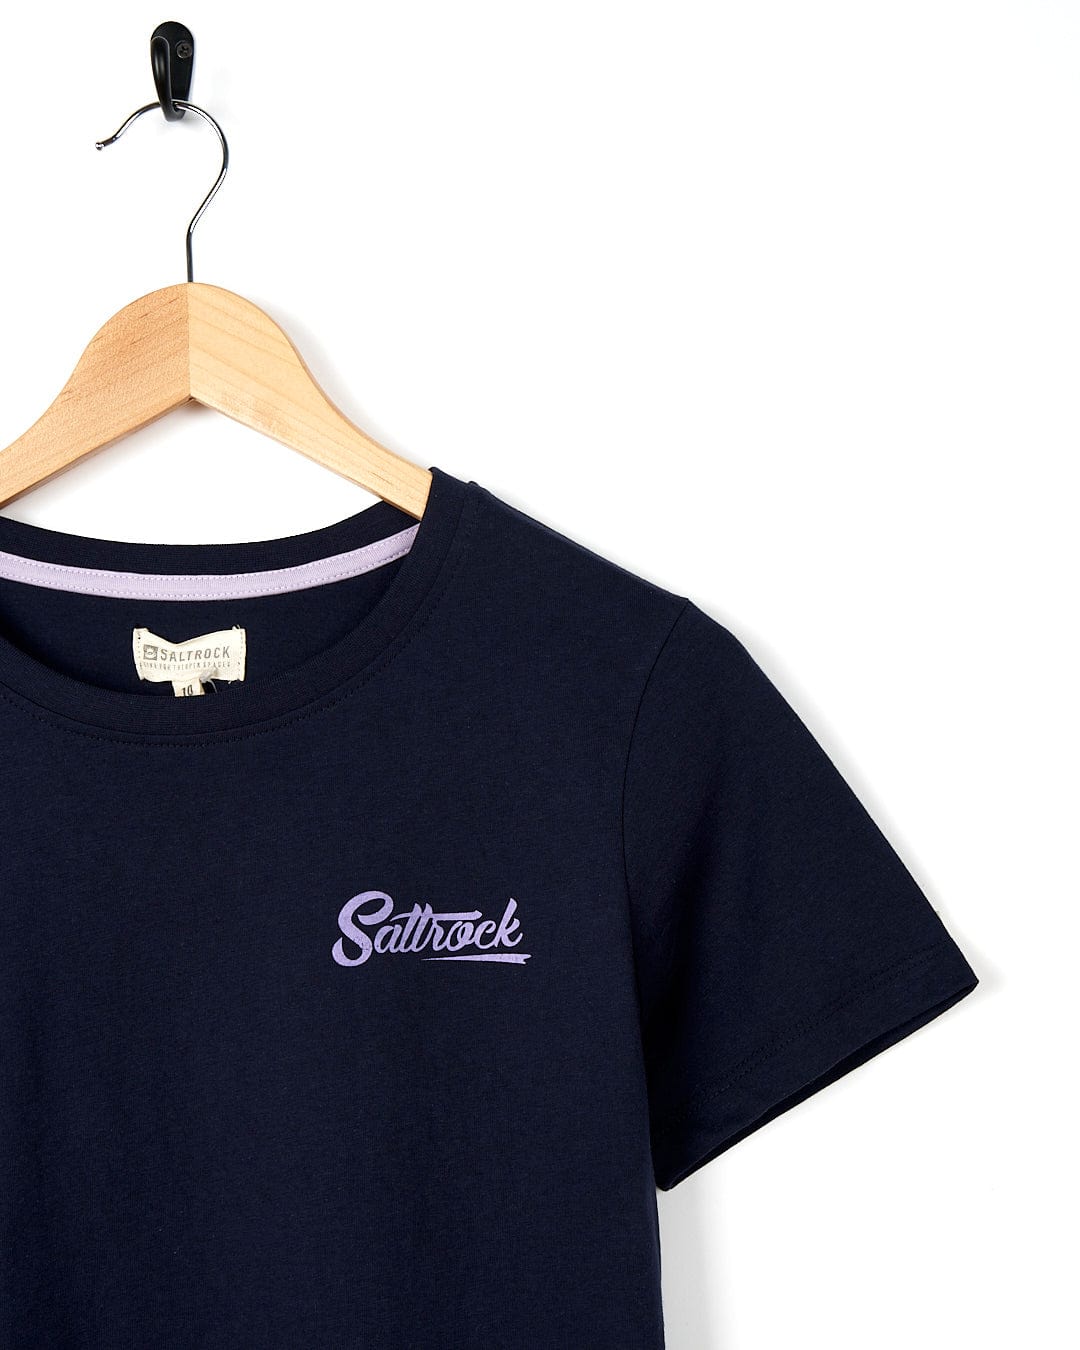 A Saltrock navy t-shirt with the word 'southwick' embroidered on it.